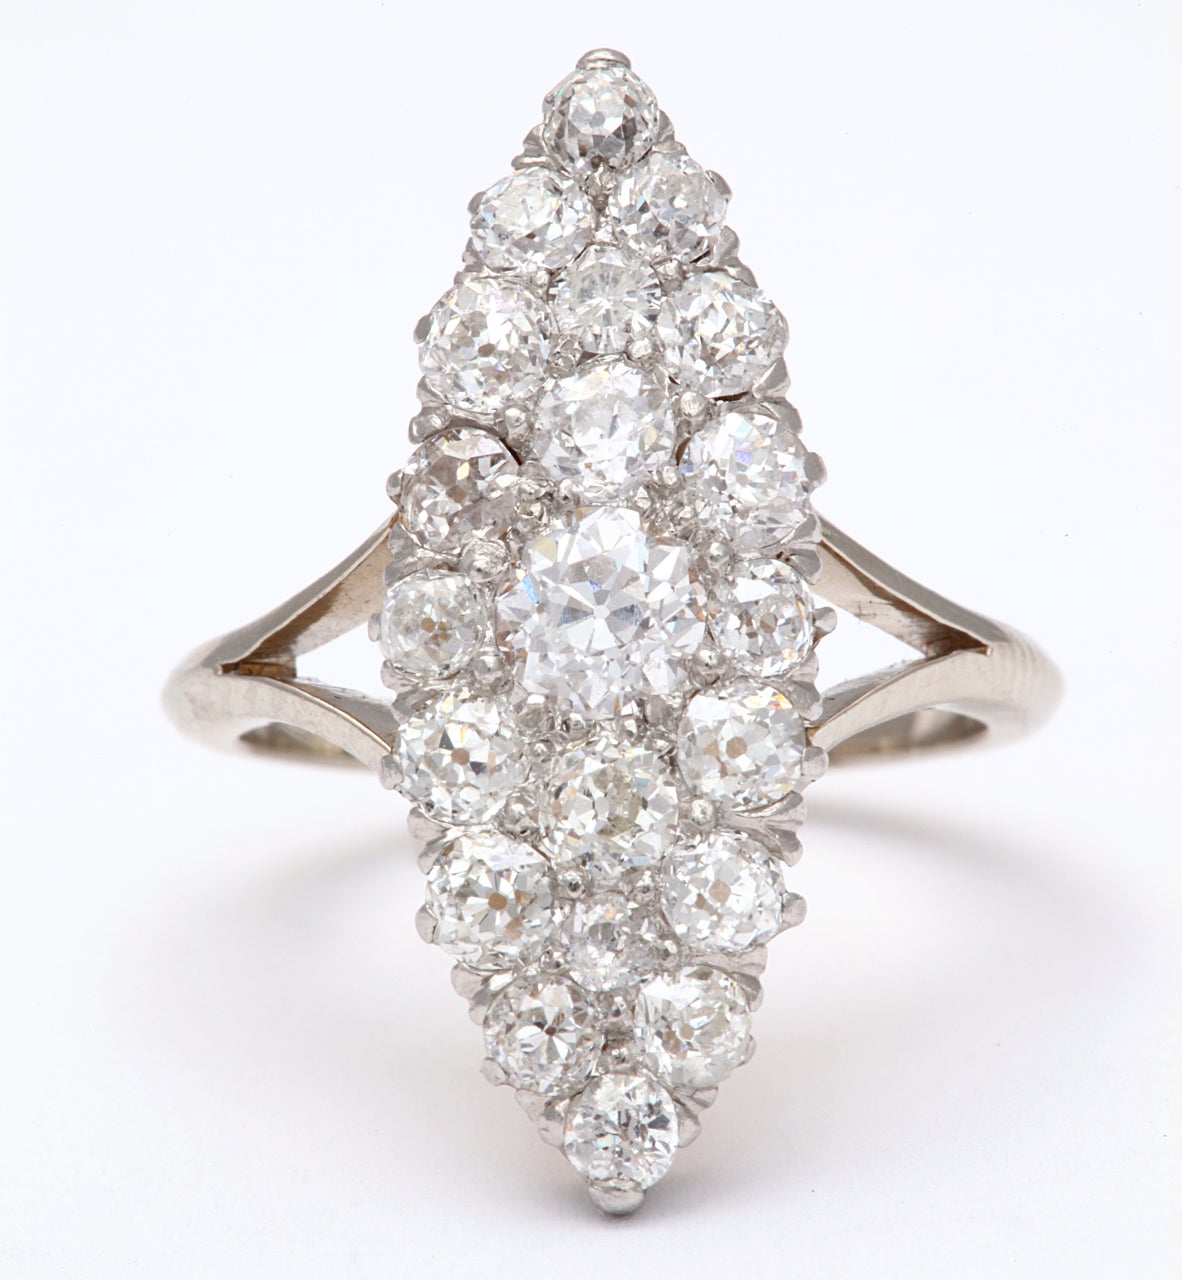 A truly brilliant cluster of white old mine diamonds sets this ring apart from the others of this style,  Set in a marquise shape, the diamonds  are a tribute to the glitter of the Edwardian era. Closely placed in pave form, the stones become a